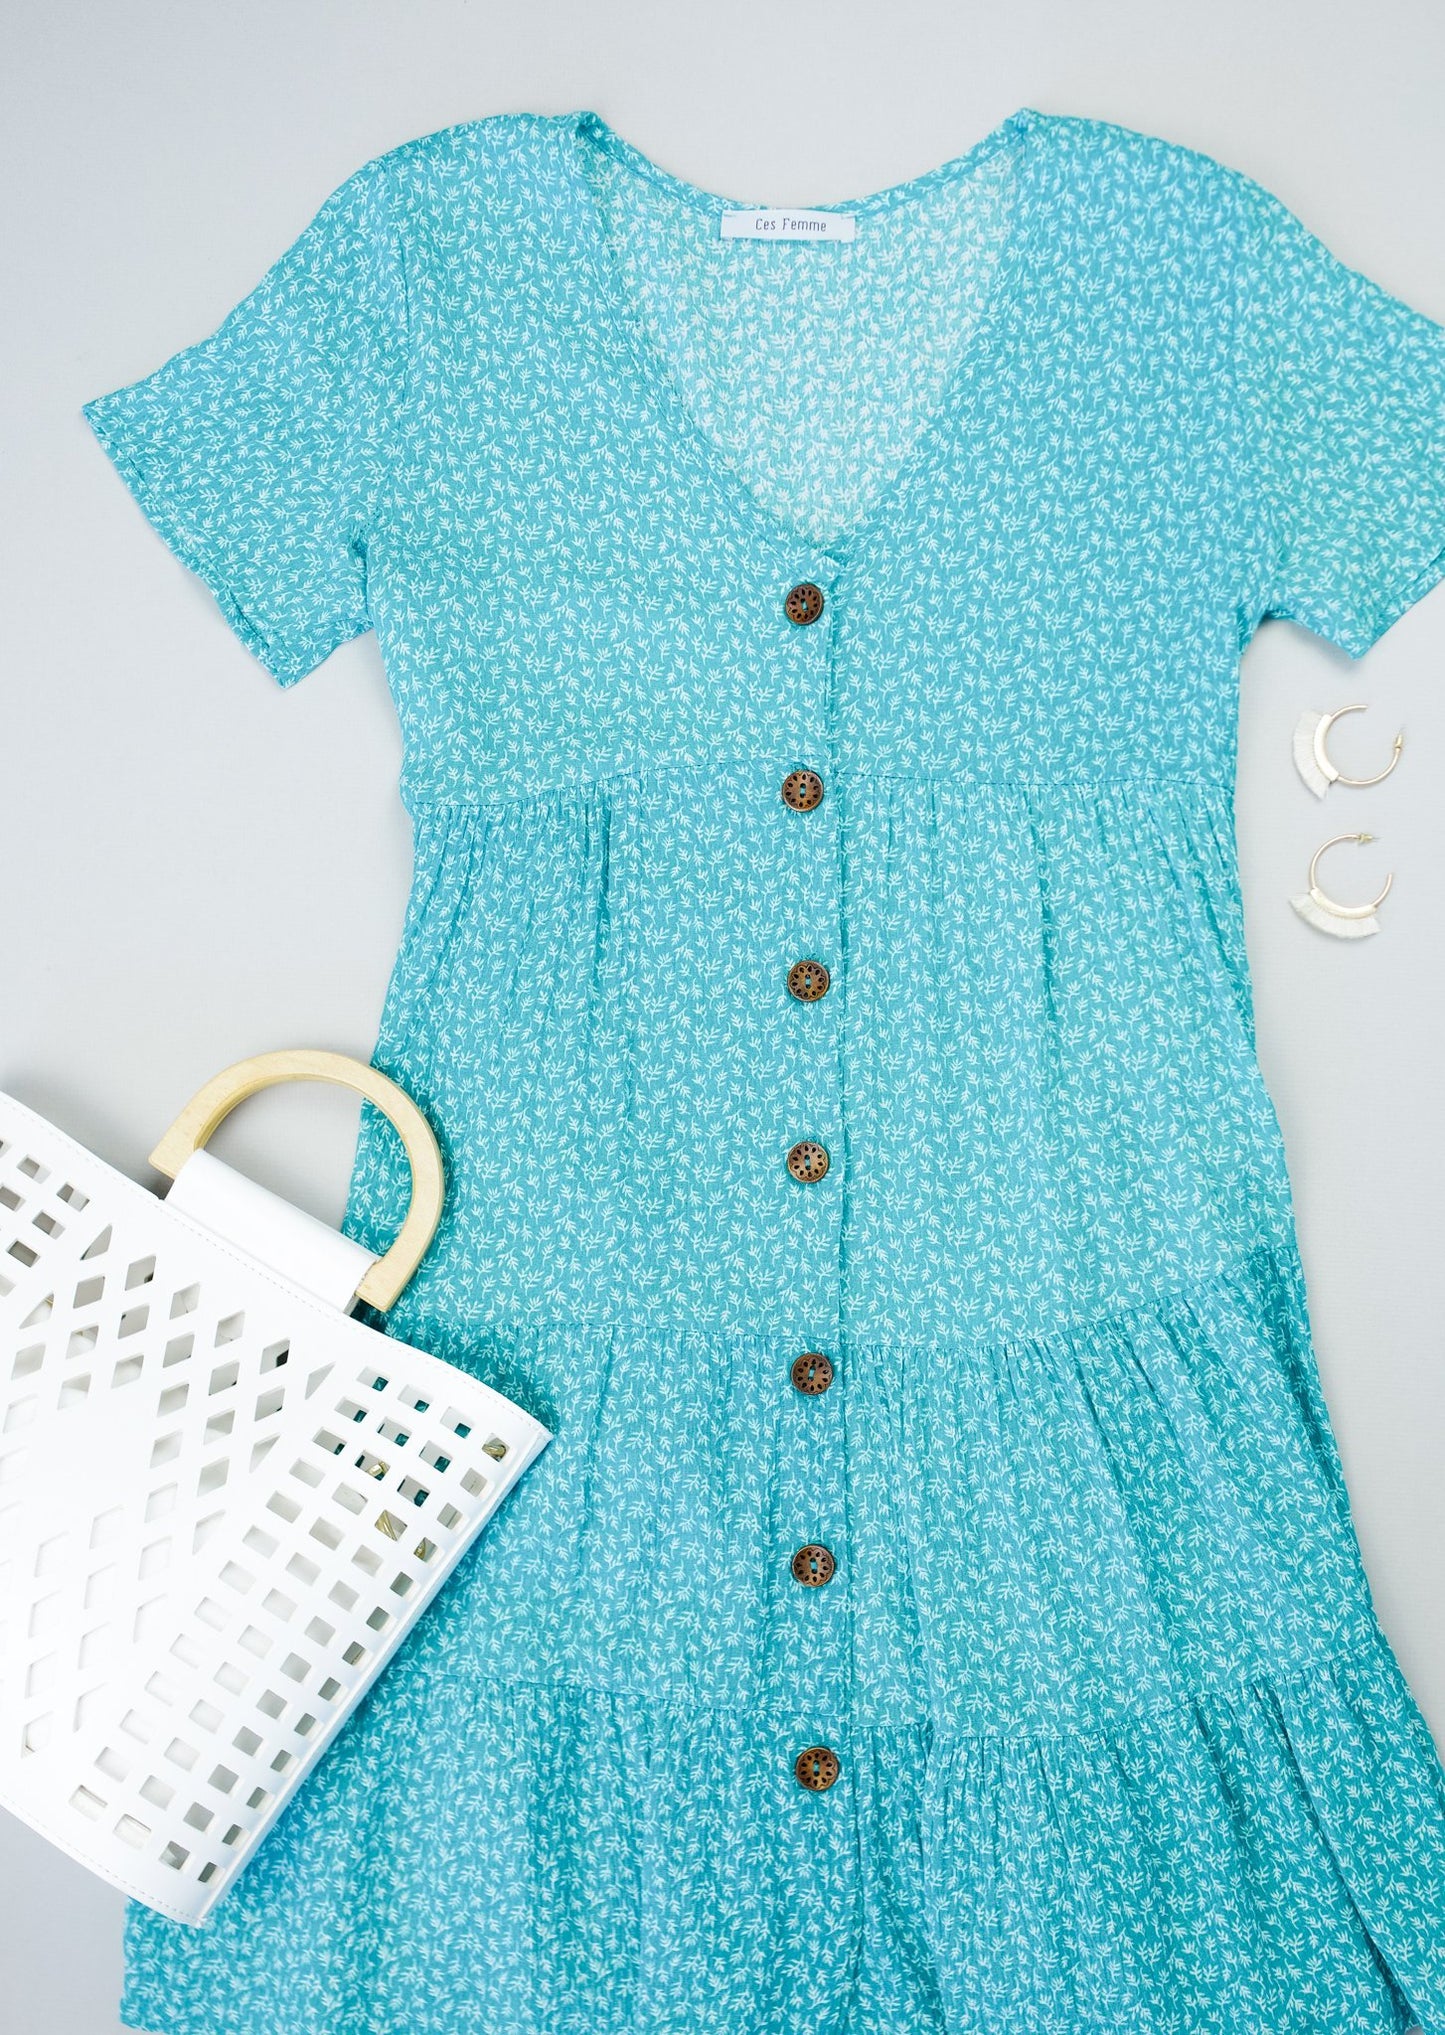 Summertime Button-Down Dress In Turquoise